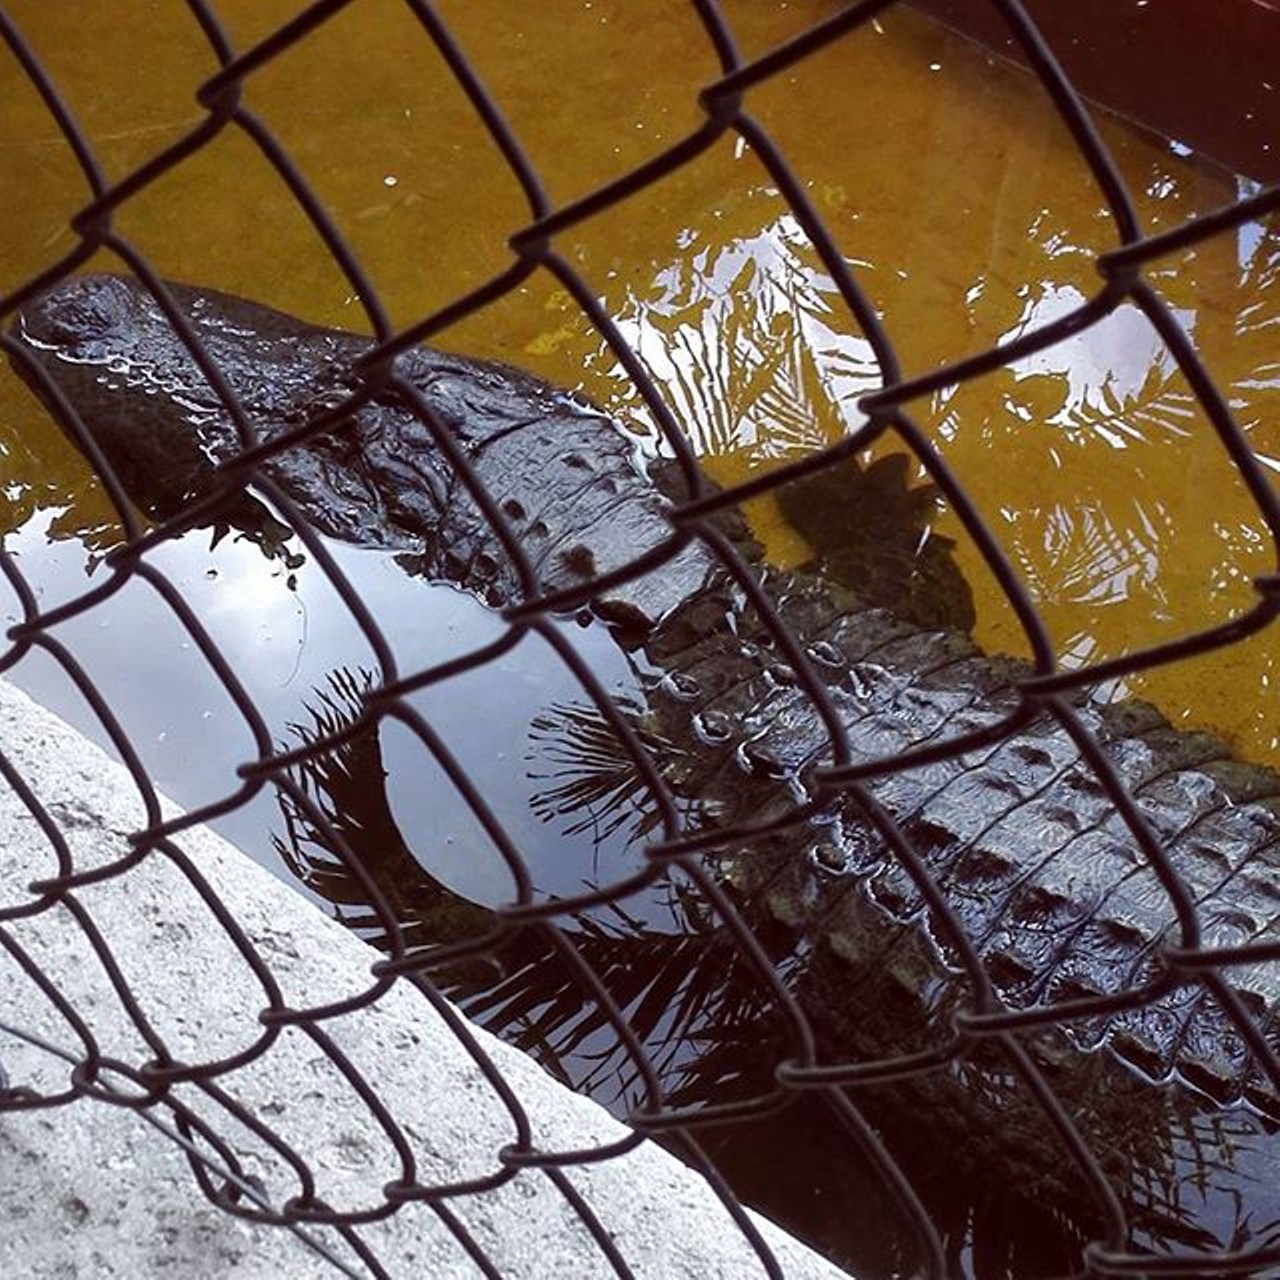 Instagram user bertme96 got to chill with this gator at Gatorland.